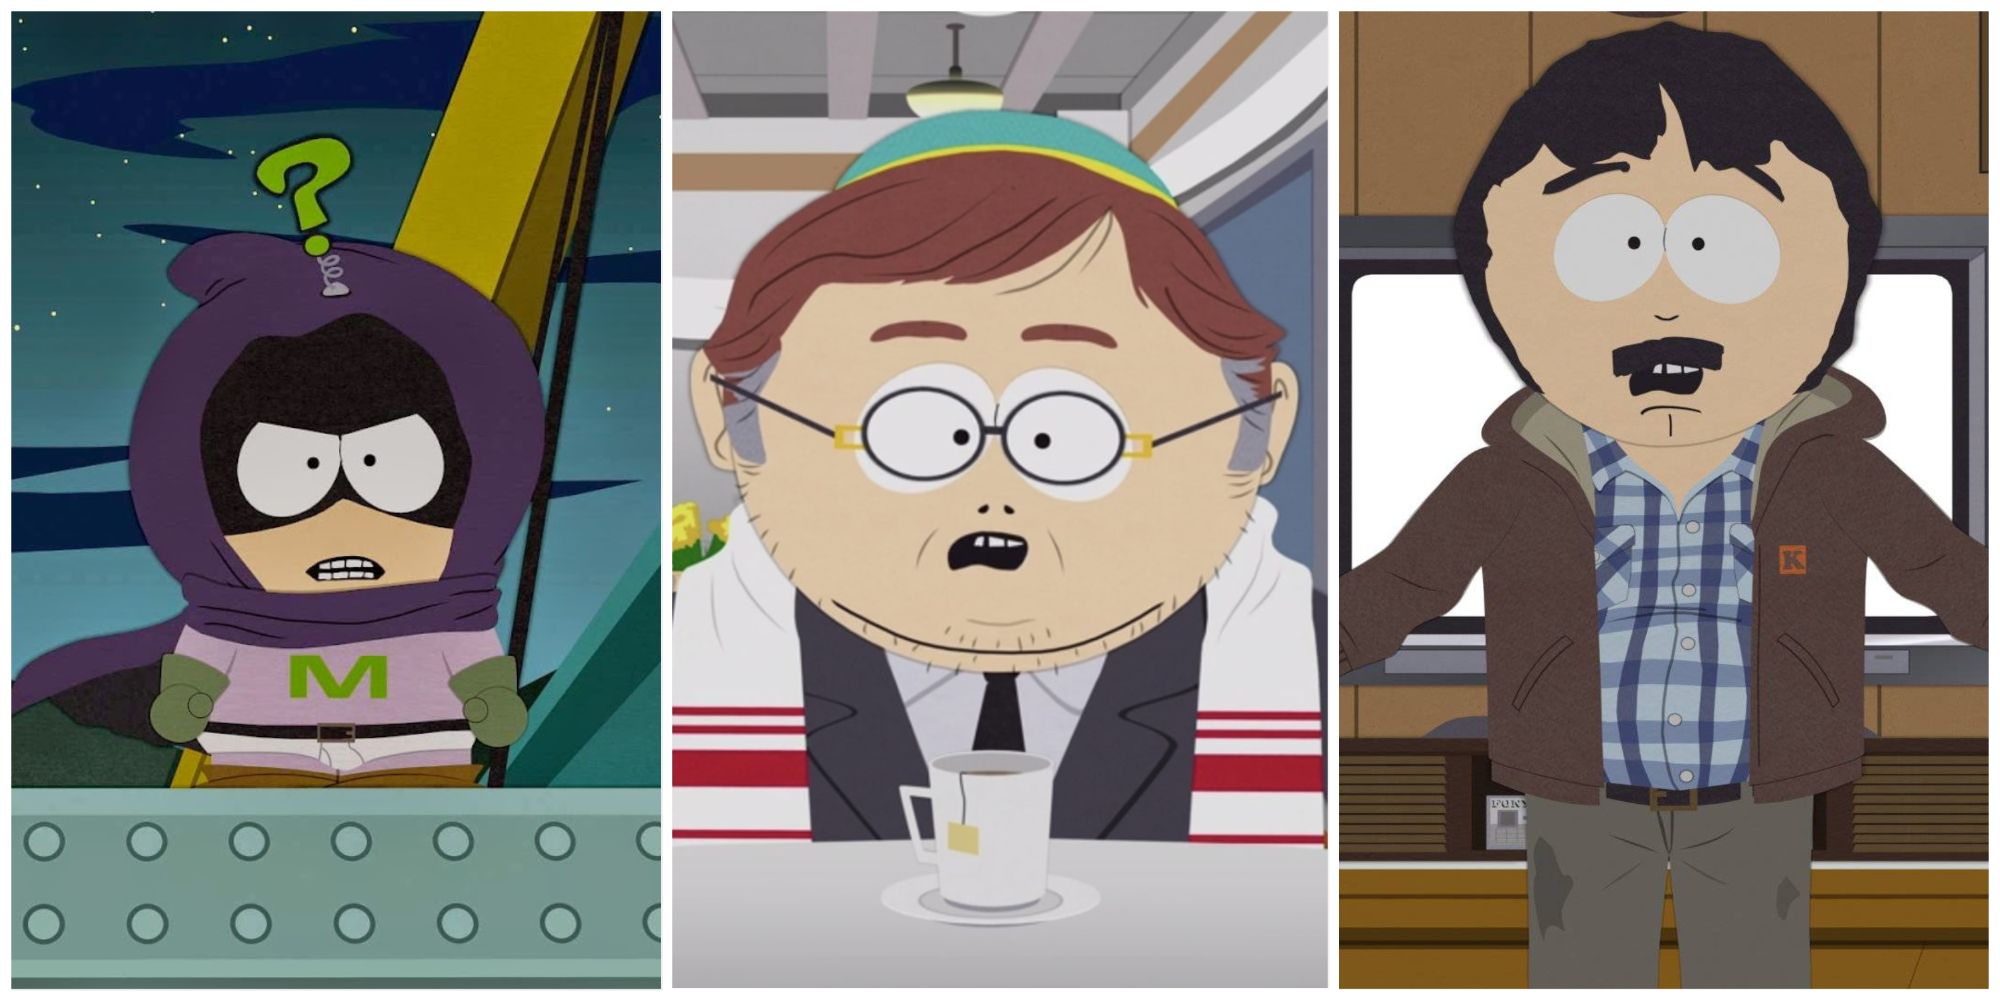 A collage image featuring South Park characters Mysterion (Kenny), grown-up Eric Cartman, and Randy Marsh